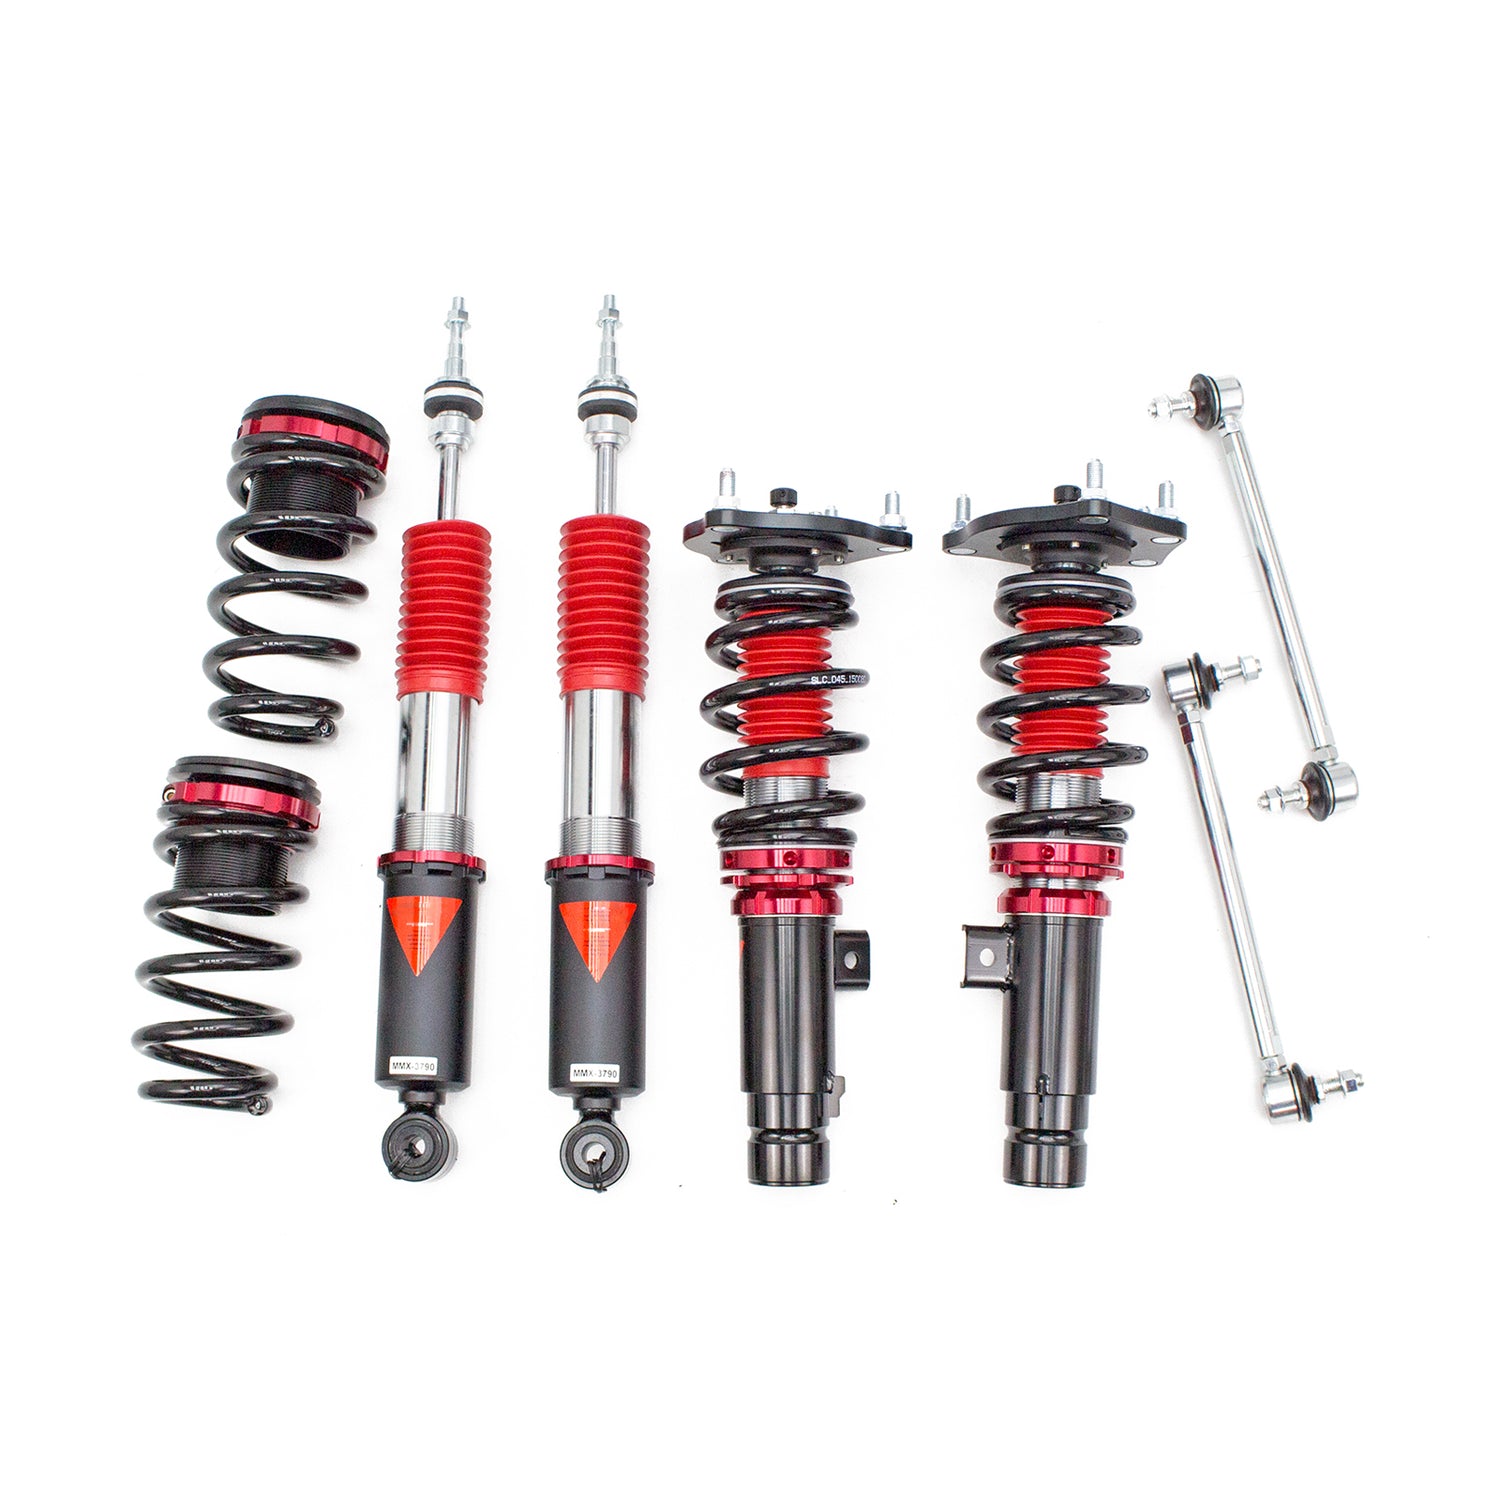 MMX3790-54-A MAXX Coilovers Lowering Kit, Fully Adjustable, Ride Height, 40 Clicks Rebound Settings, Honda Civic(FC) Sport 2016+Up